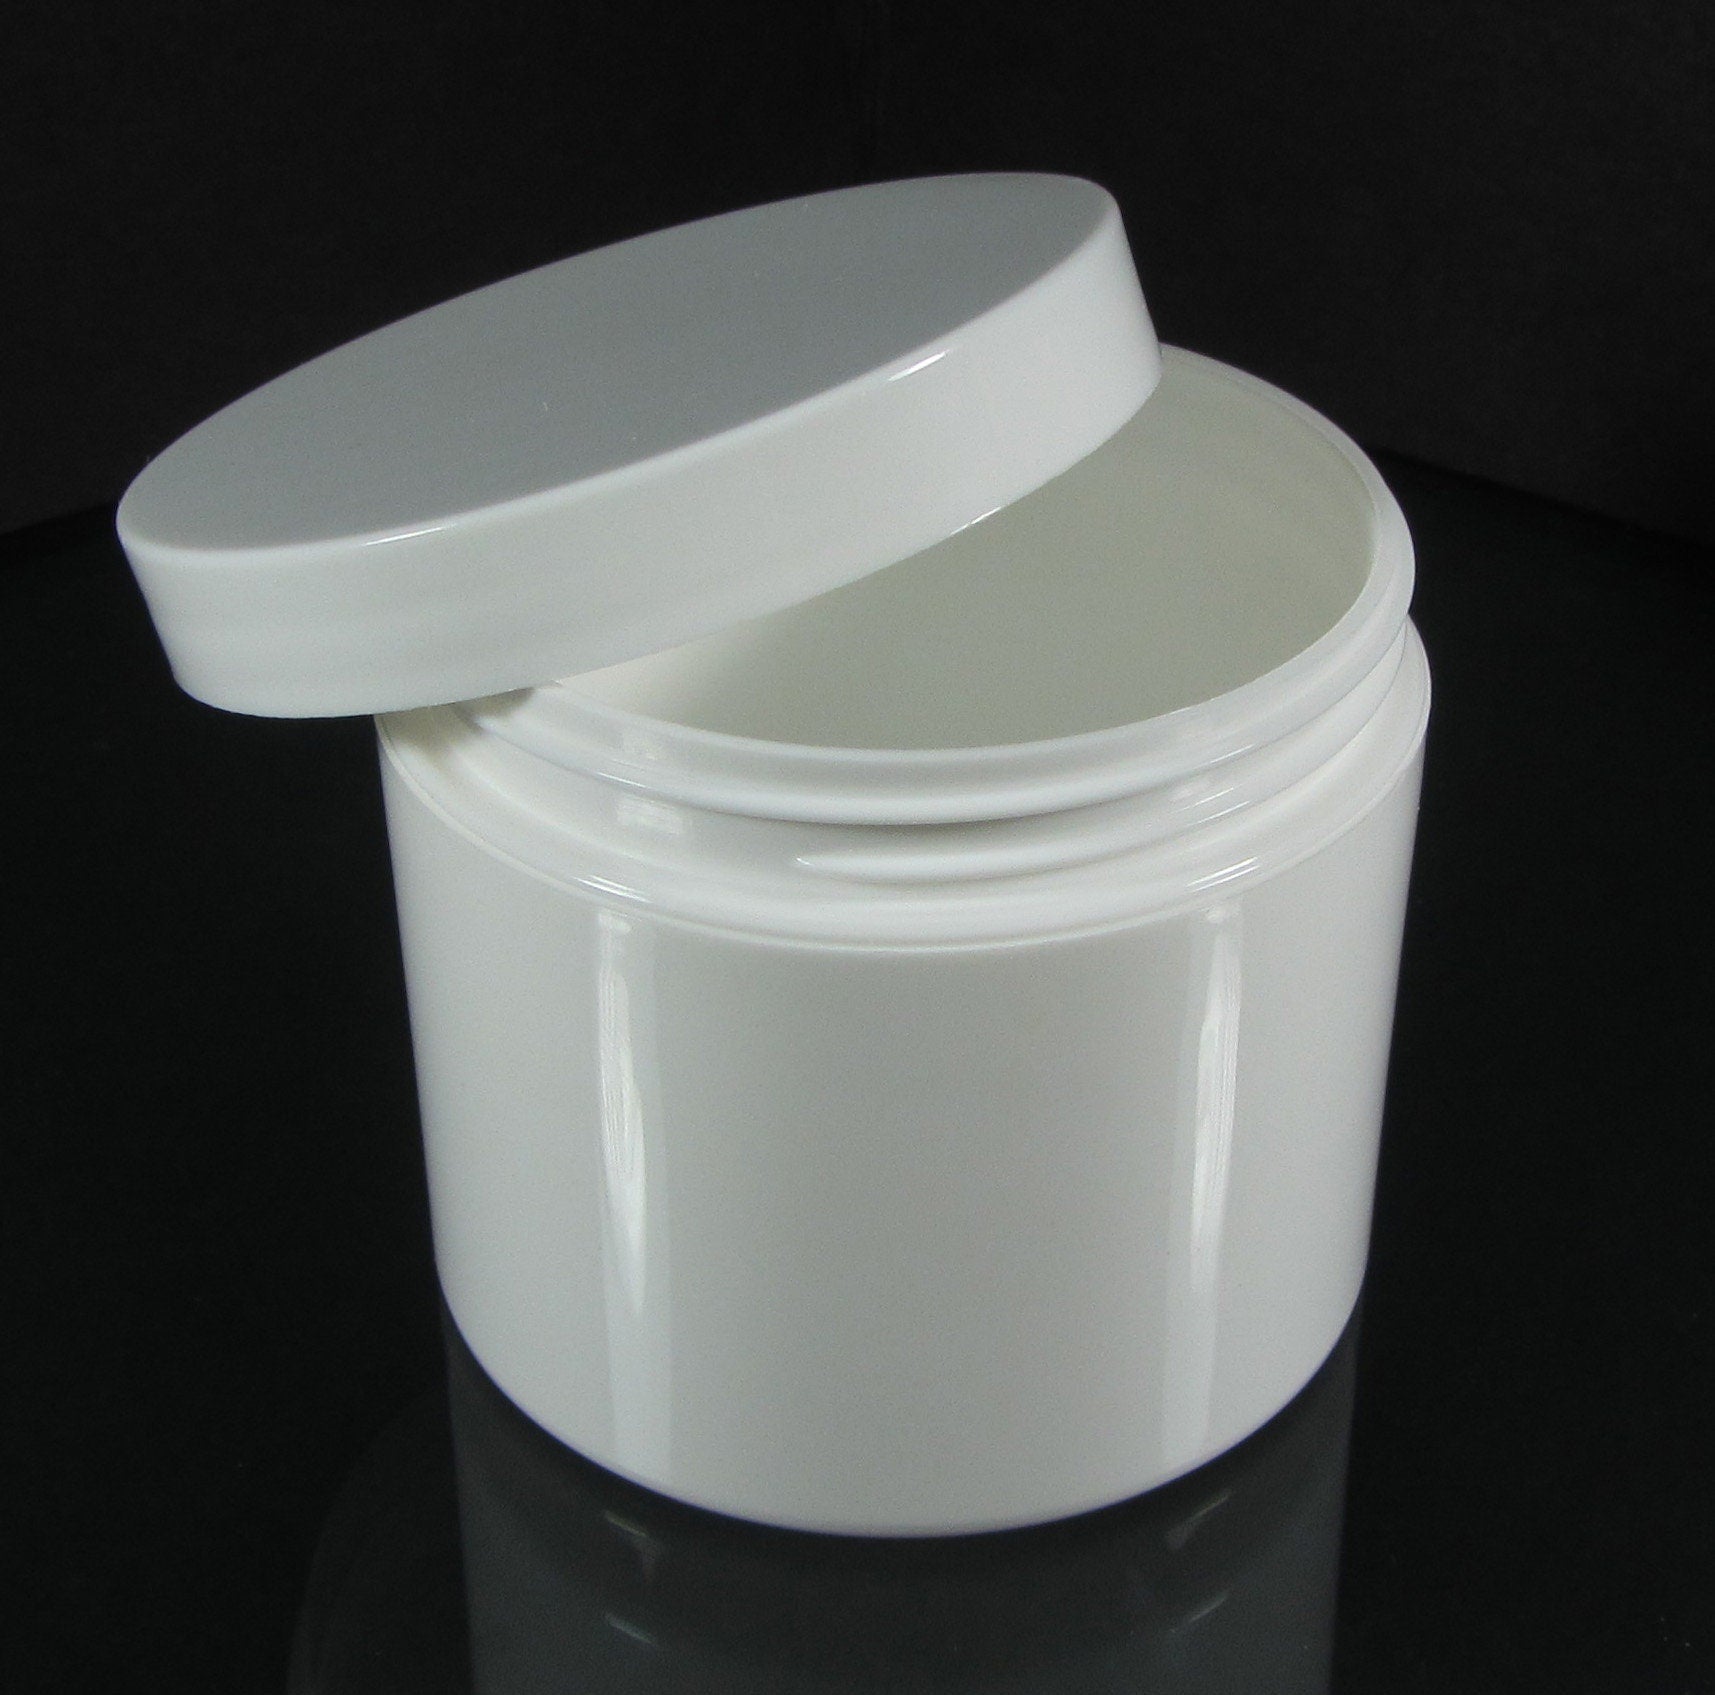 2 Beauty Containers Double Wall White Cosmetic Jars 4 oz. 120 Ml White Lid w/ Pressure Sensitive Liner (9313-2) Discount Cosmetic Jars